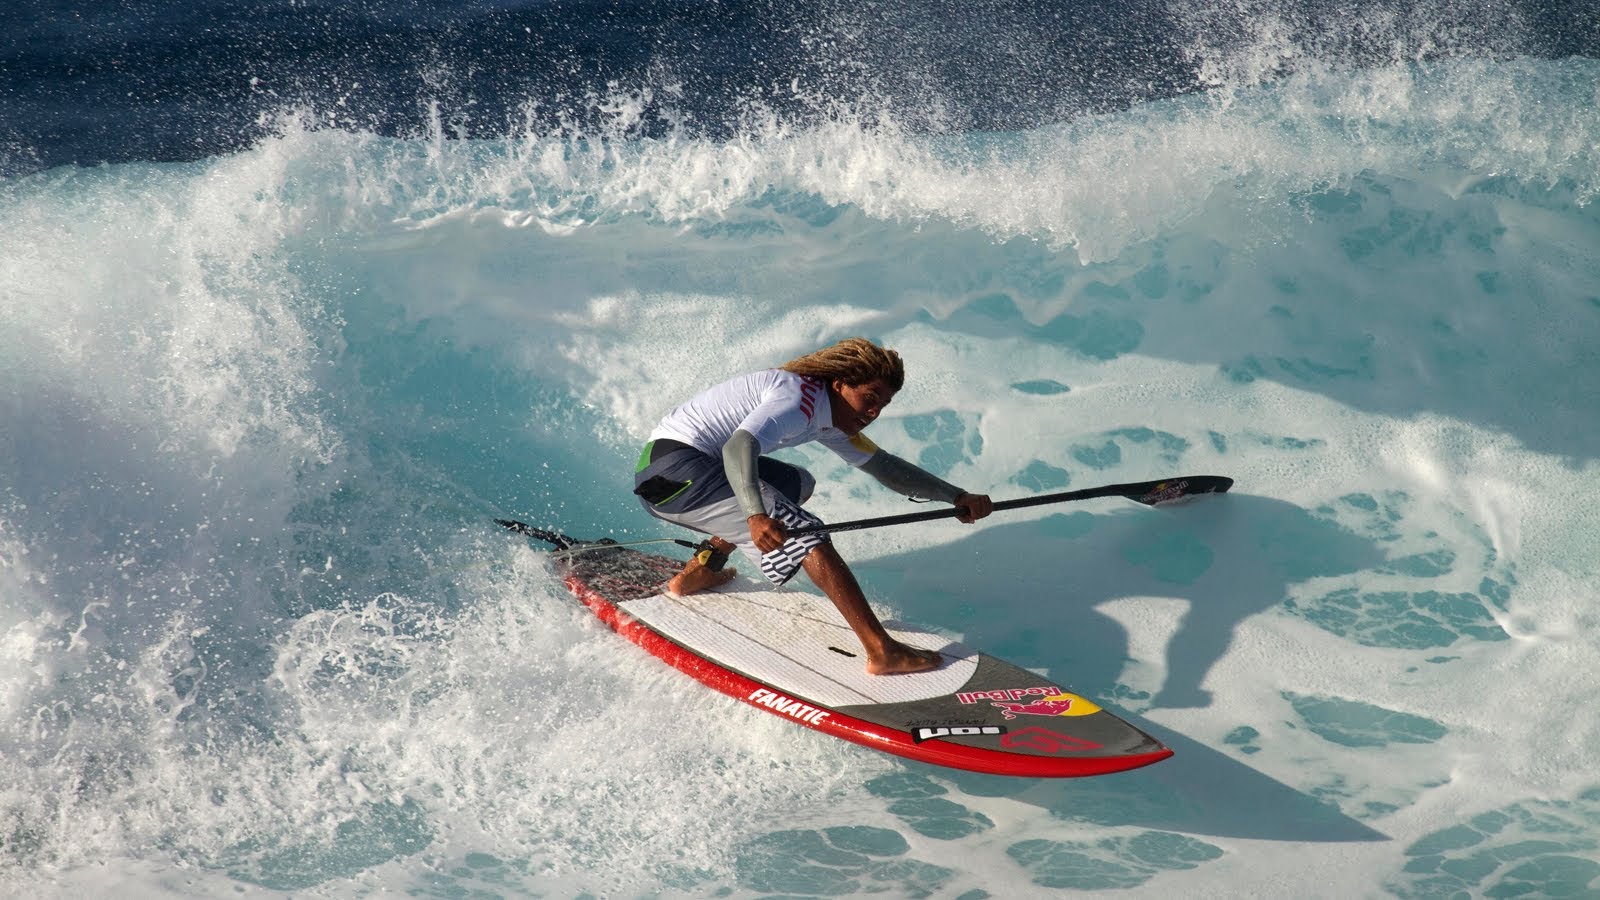 Heavy waters…lets paddle surf!